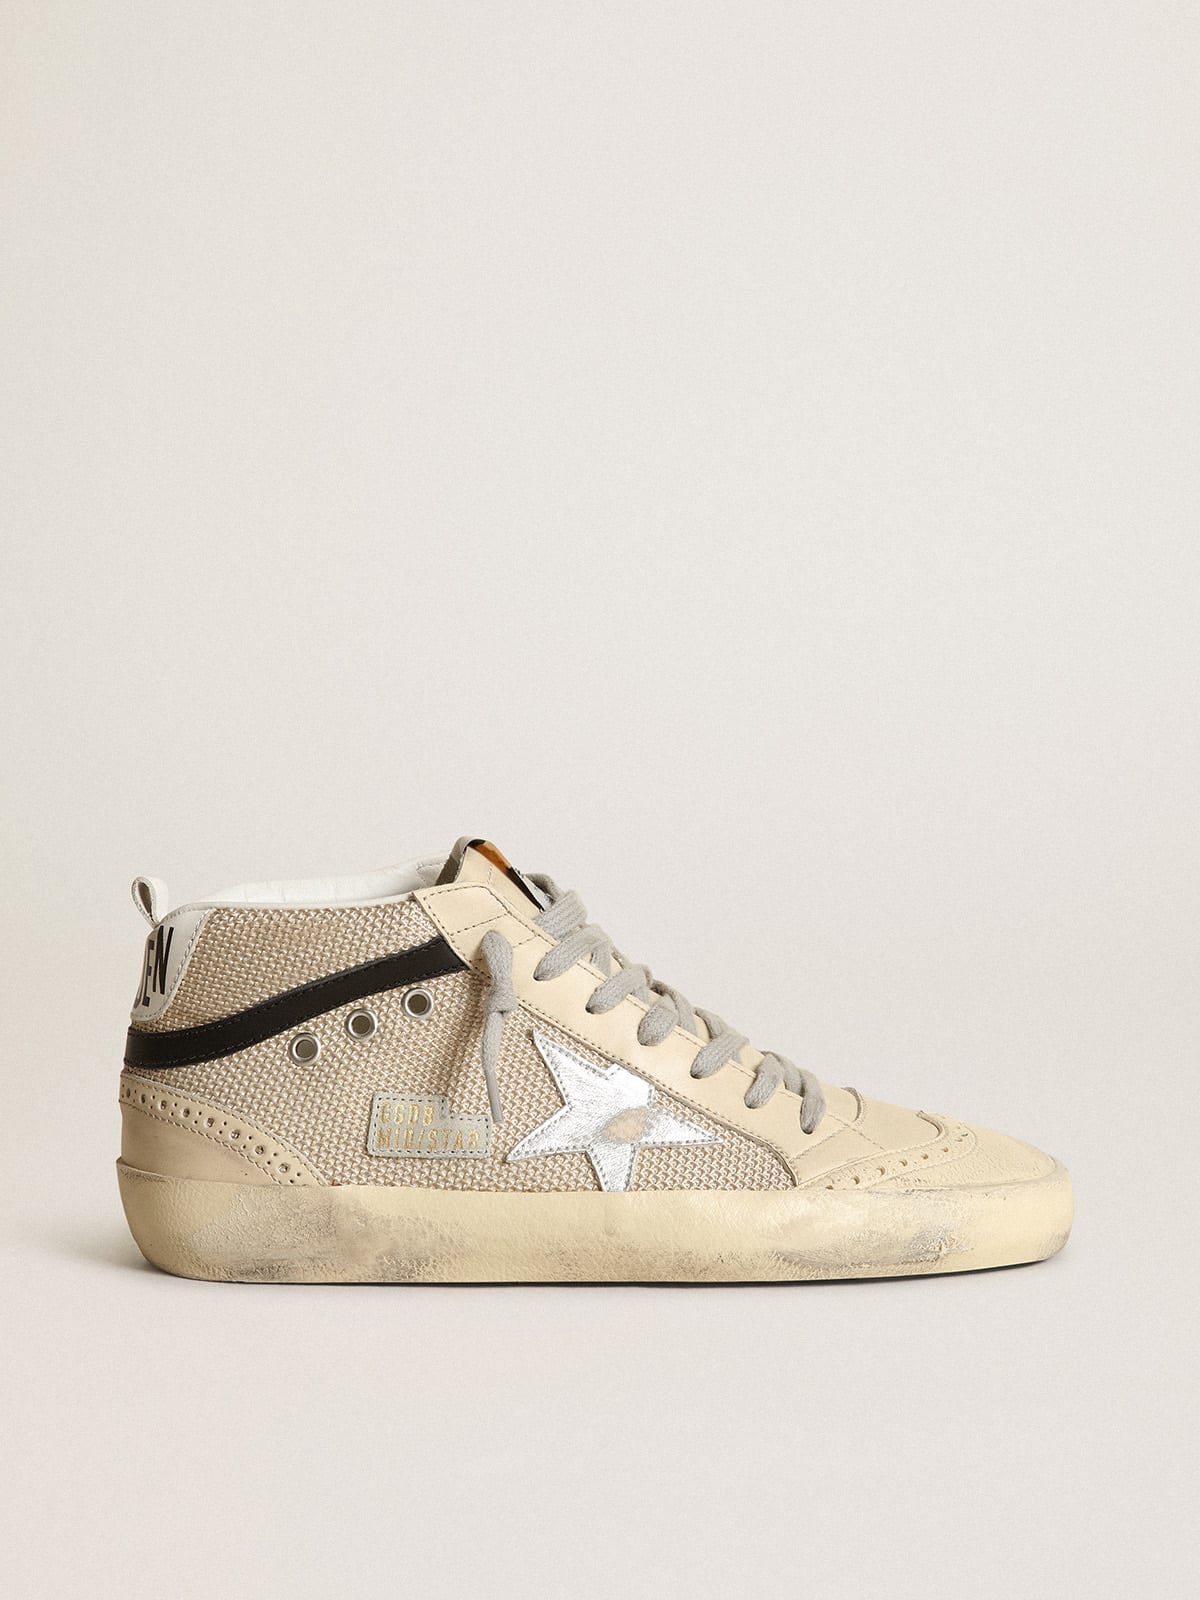 Golden Goose - Mid Star LTD sneakers in cream-colored mesh with silver metallic leather star and black leather flash in 